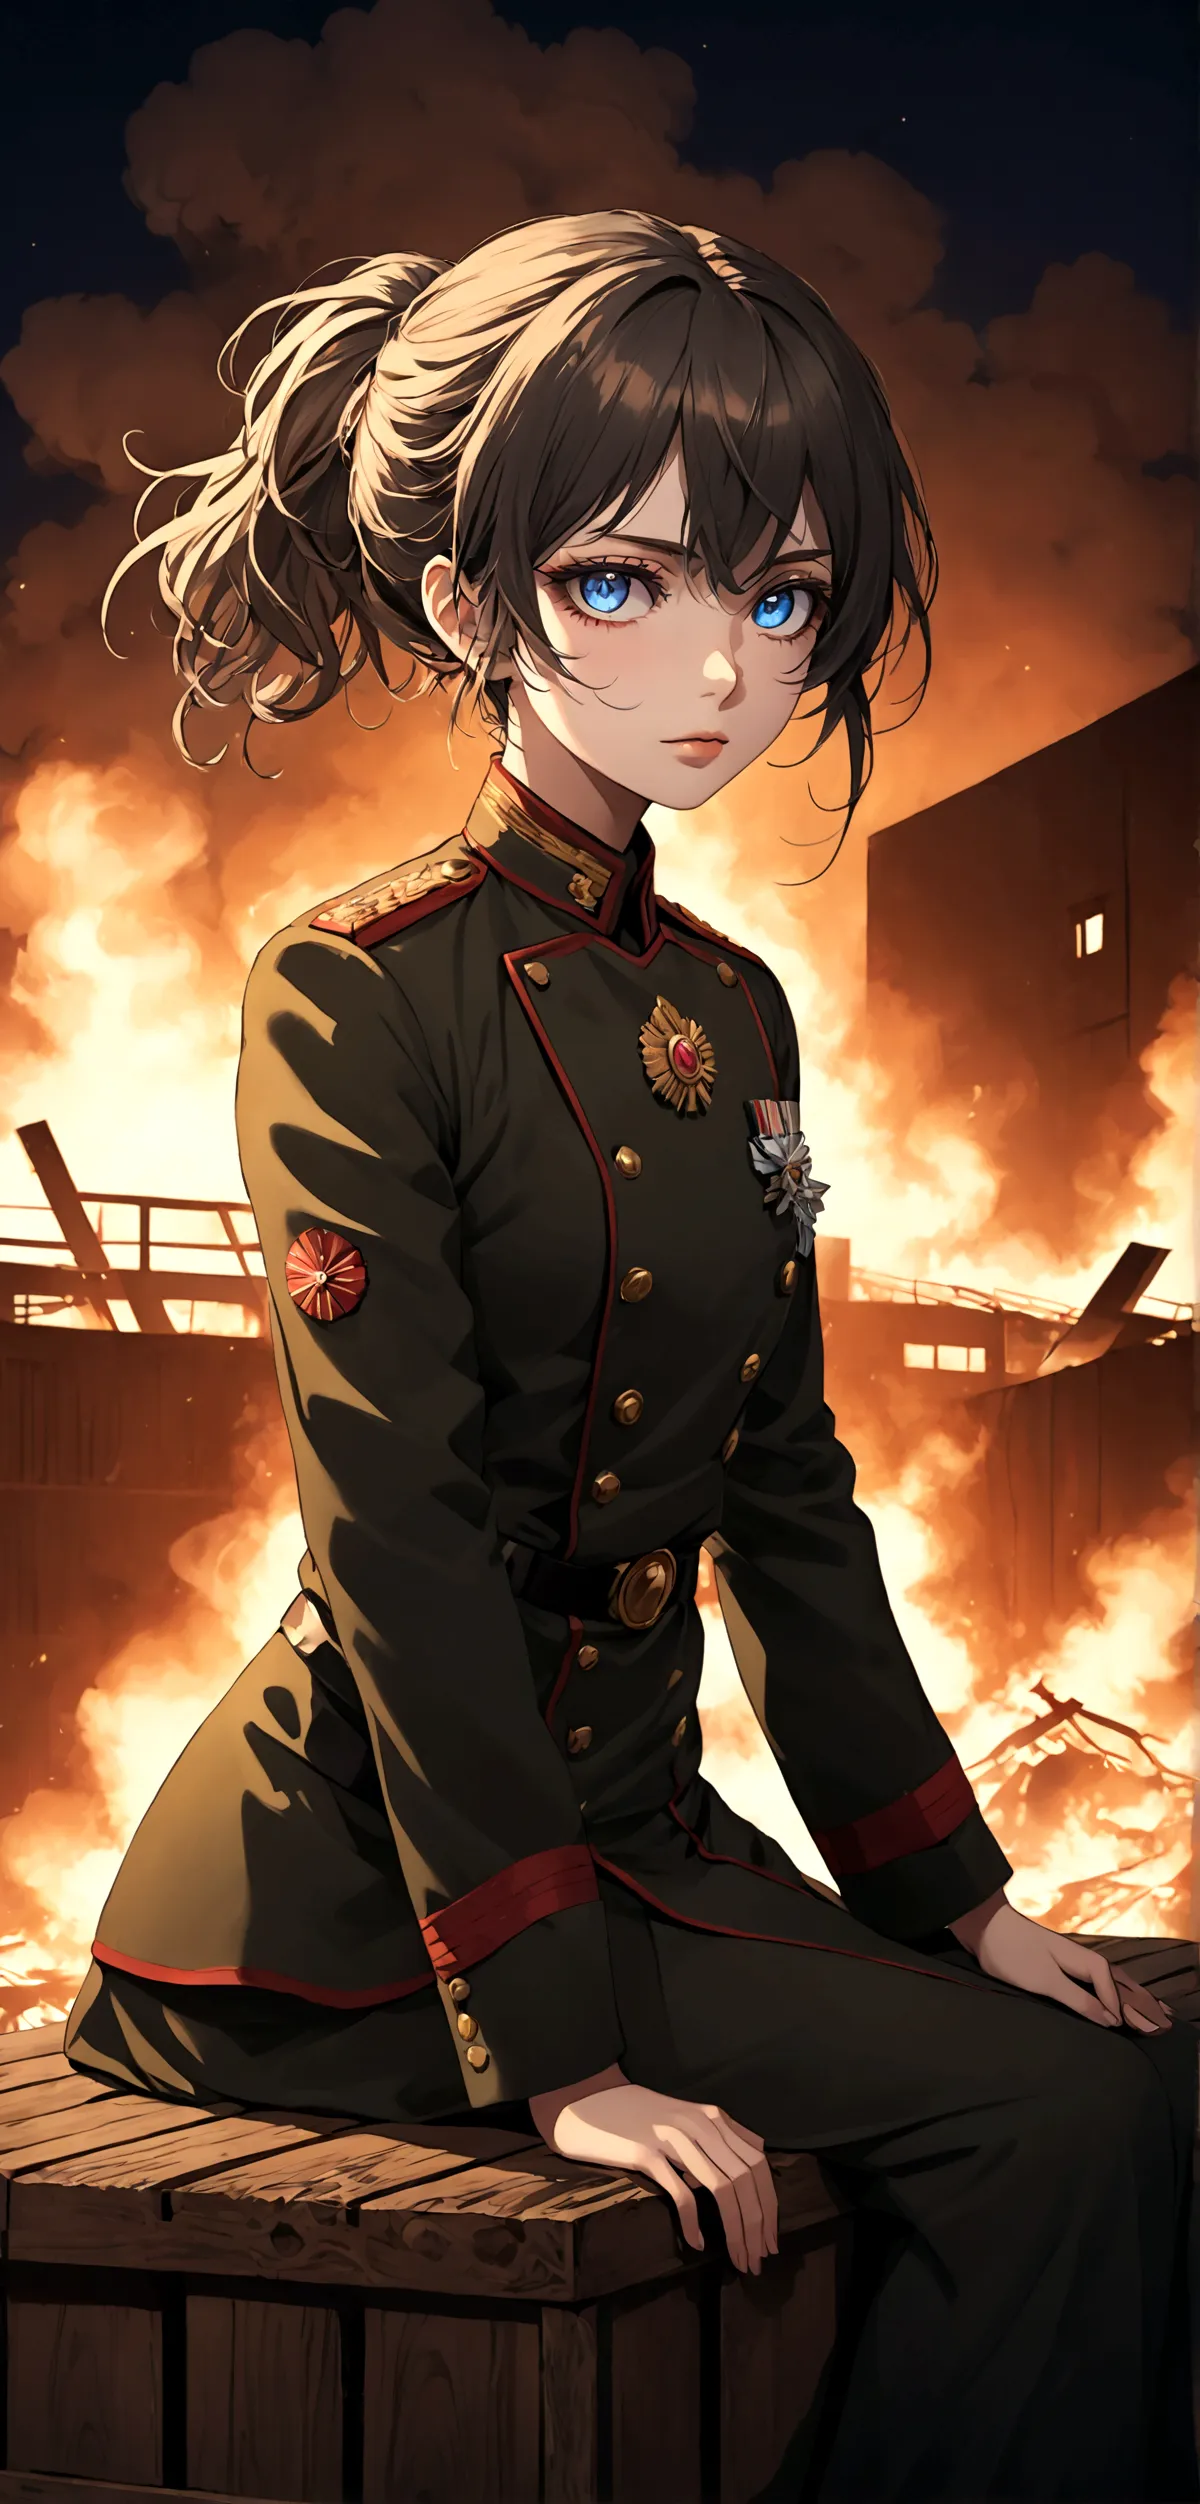 A beautiful anime girl wearing a  military uniform, sit on wood box drink coffee behind warehouse burning in the night, 90 photo...